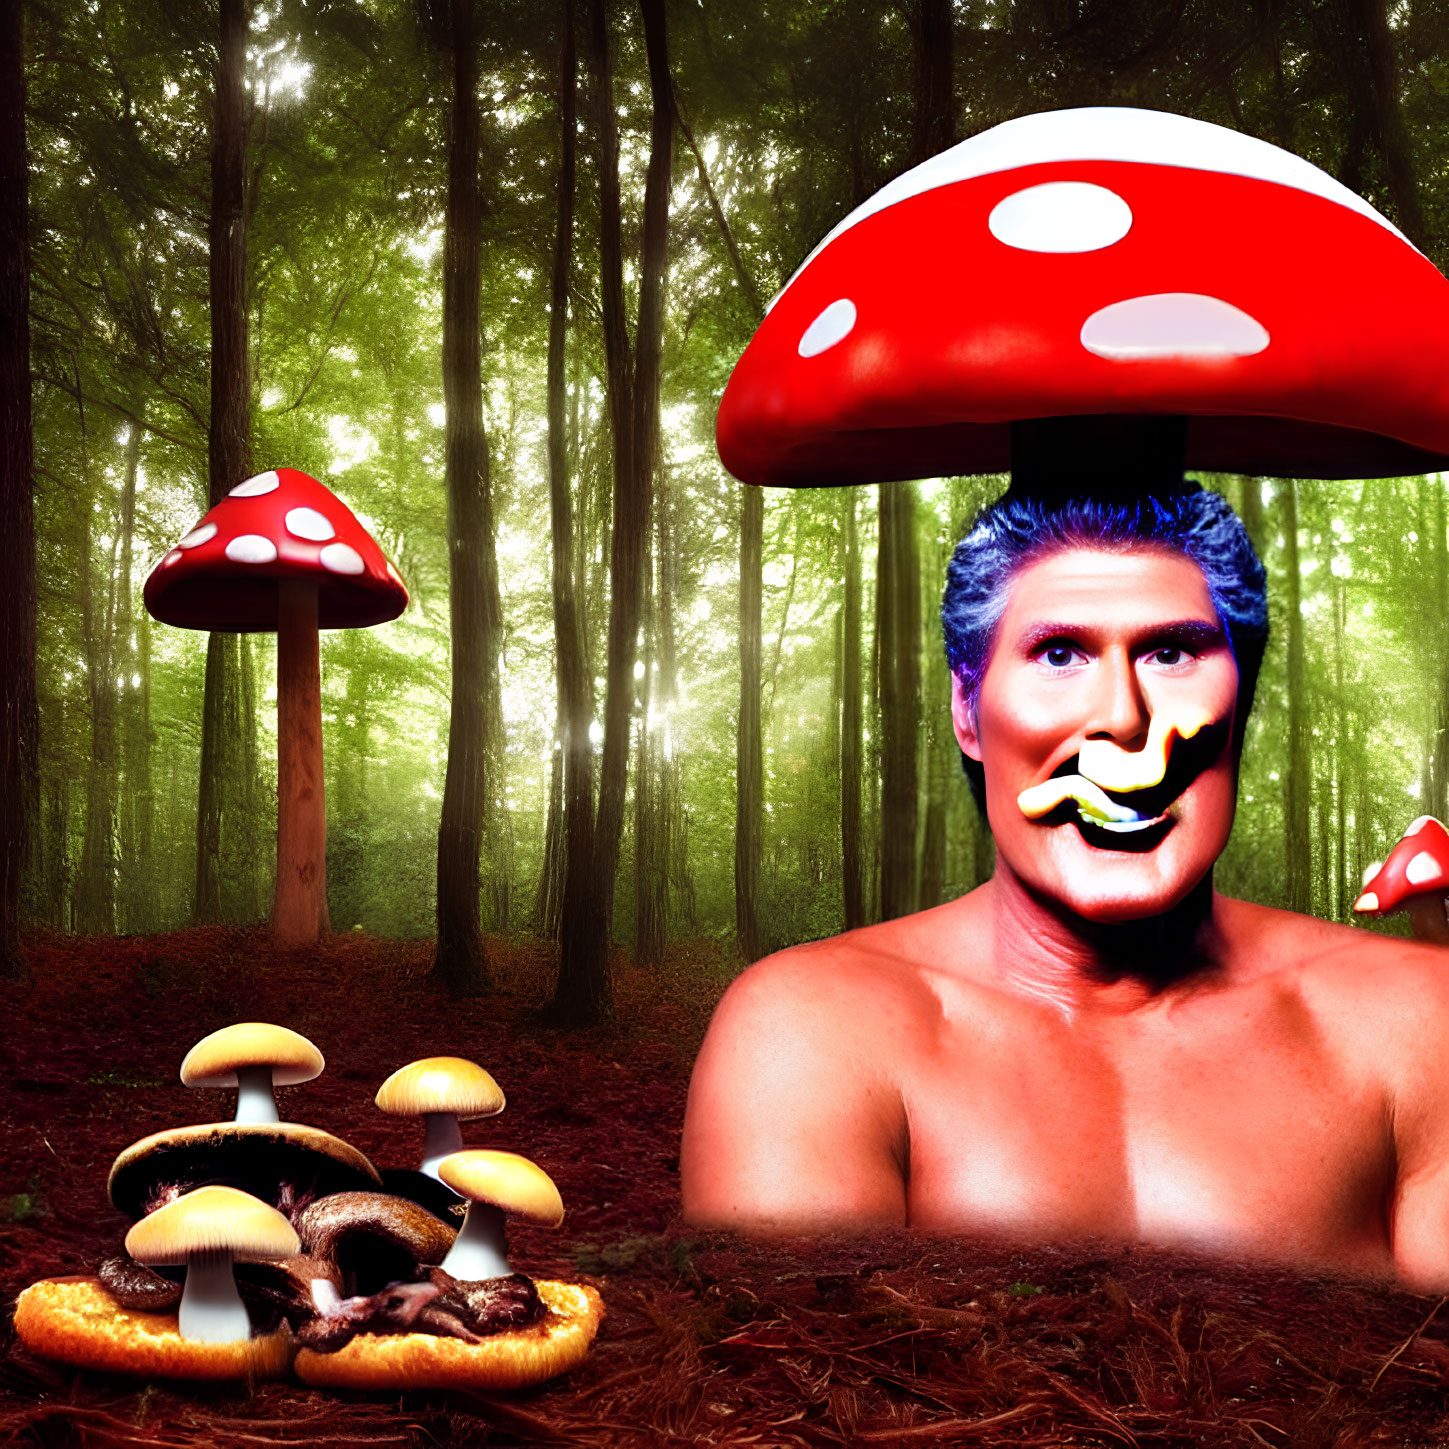 Colorful surreal forest scene with oversized mushrooms and stylized male figure blending in.